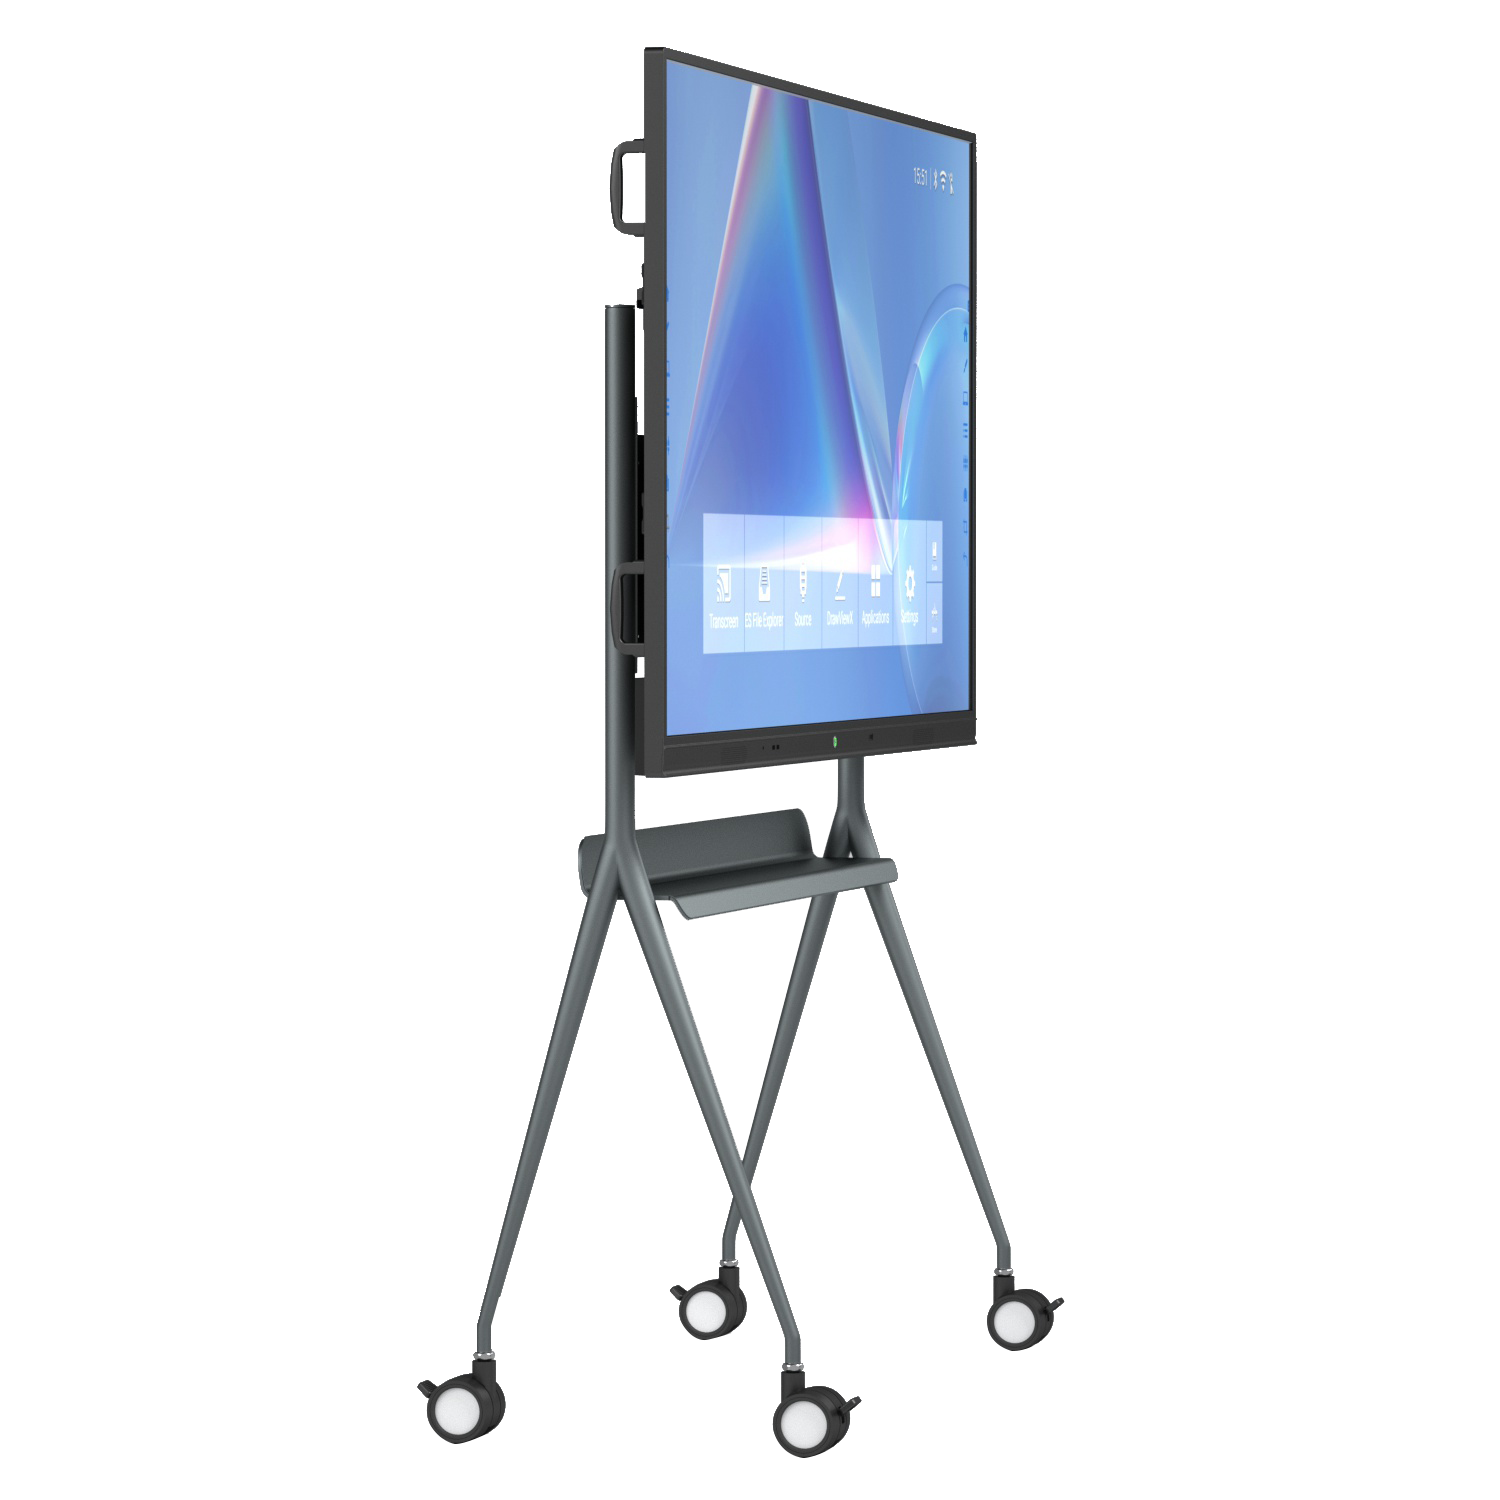 TIBURN Interactive Whiteboard Smartboard Board 75 R2 Pro 4K UHD Touch  Screen Smart Board (Electronics whiteboard with Removable Stand, Conference